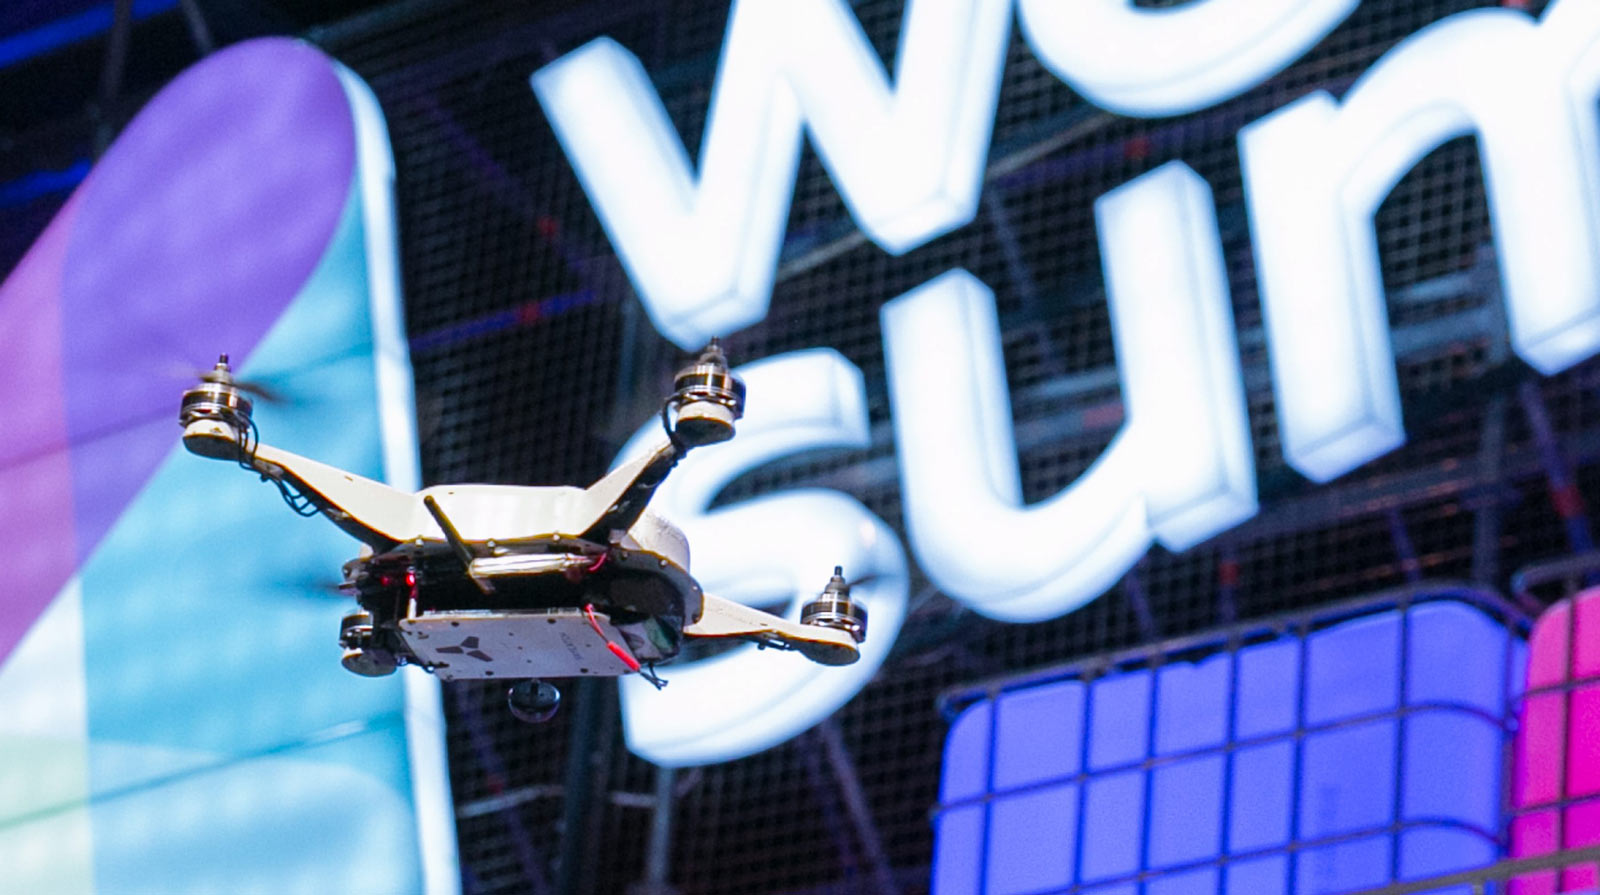 A SkyCatch-built drone flies over the stage at Web Summit in Dublin, Ireland.